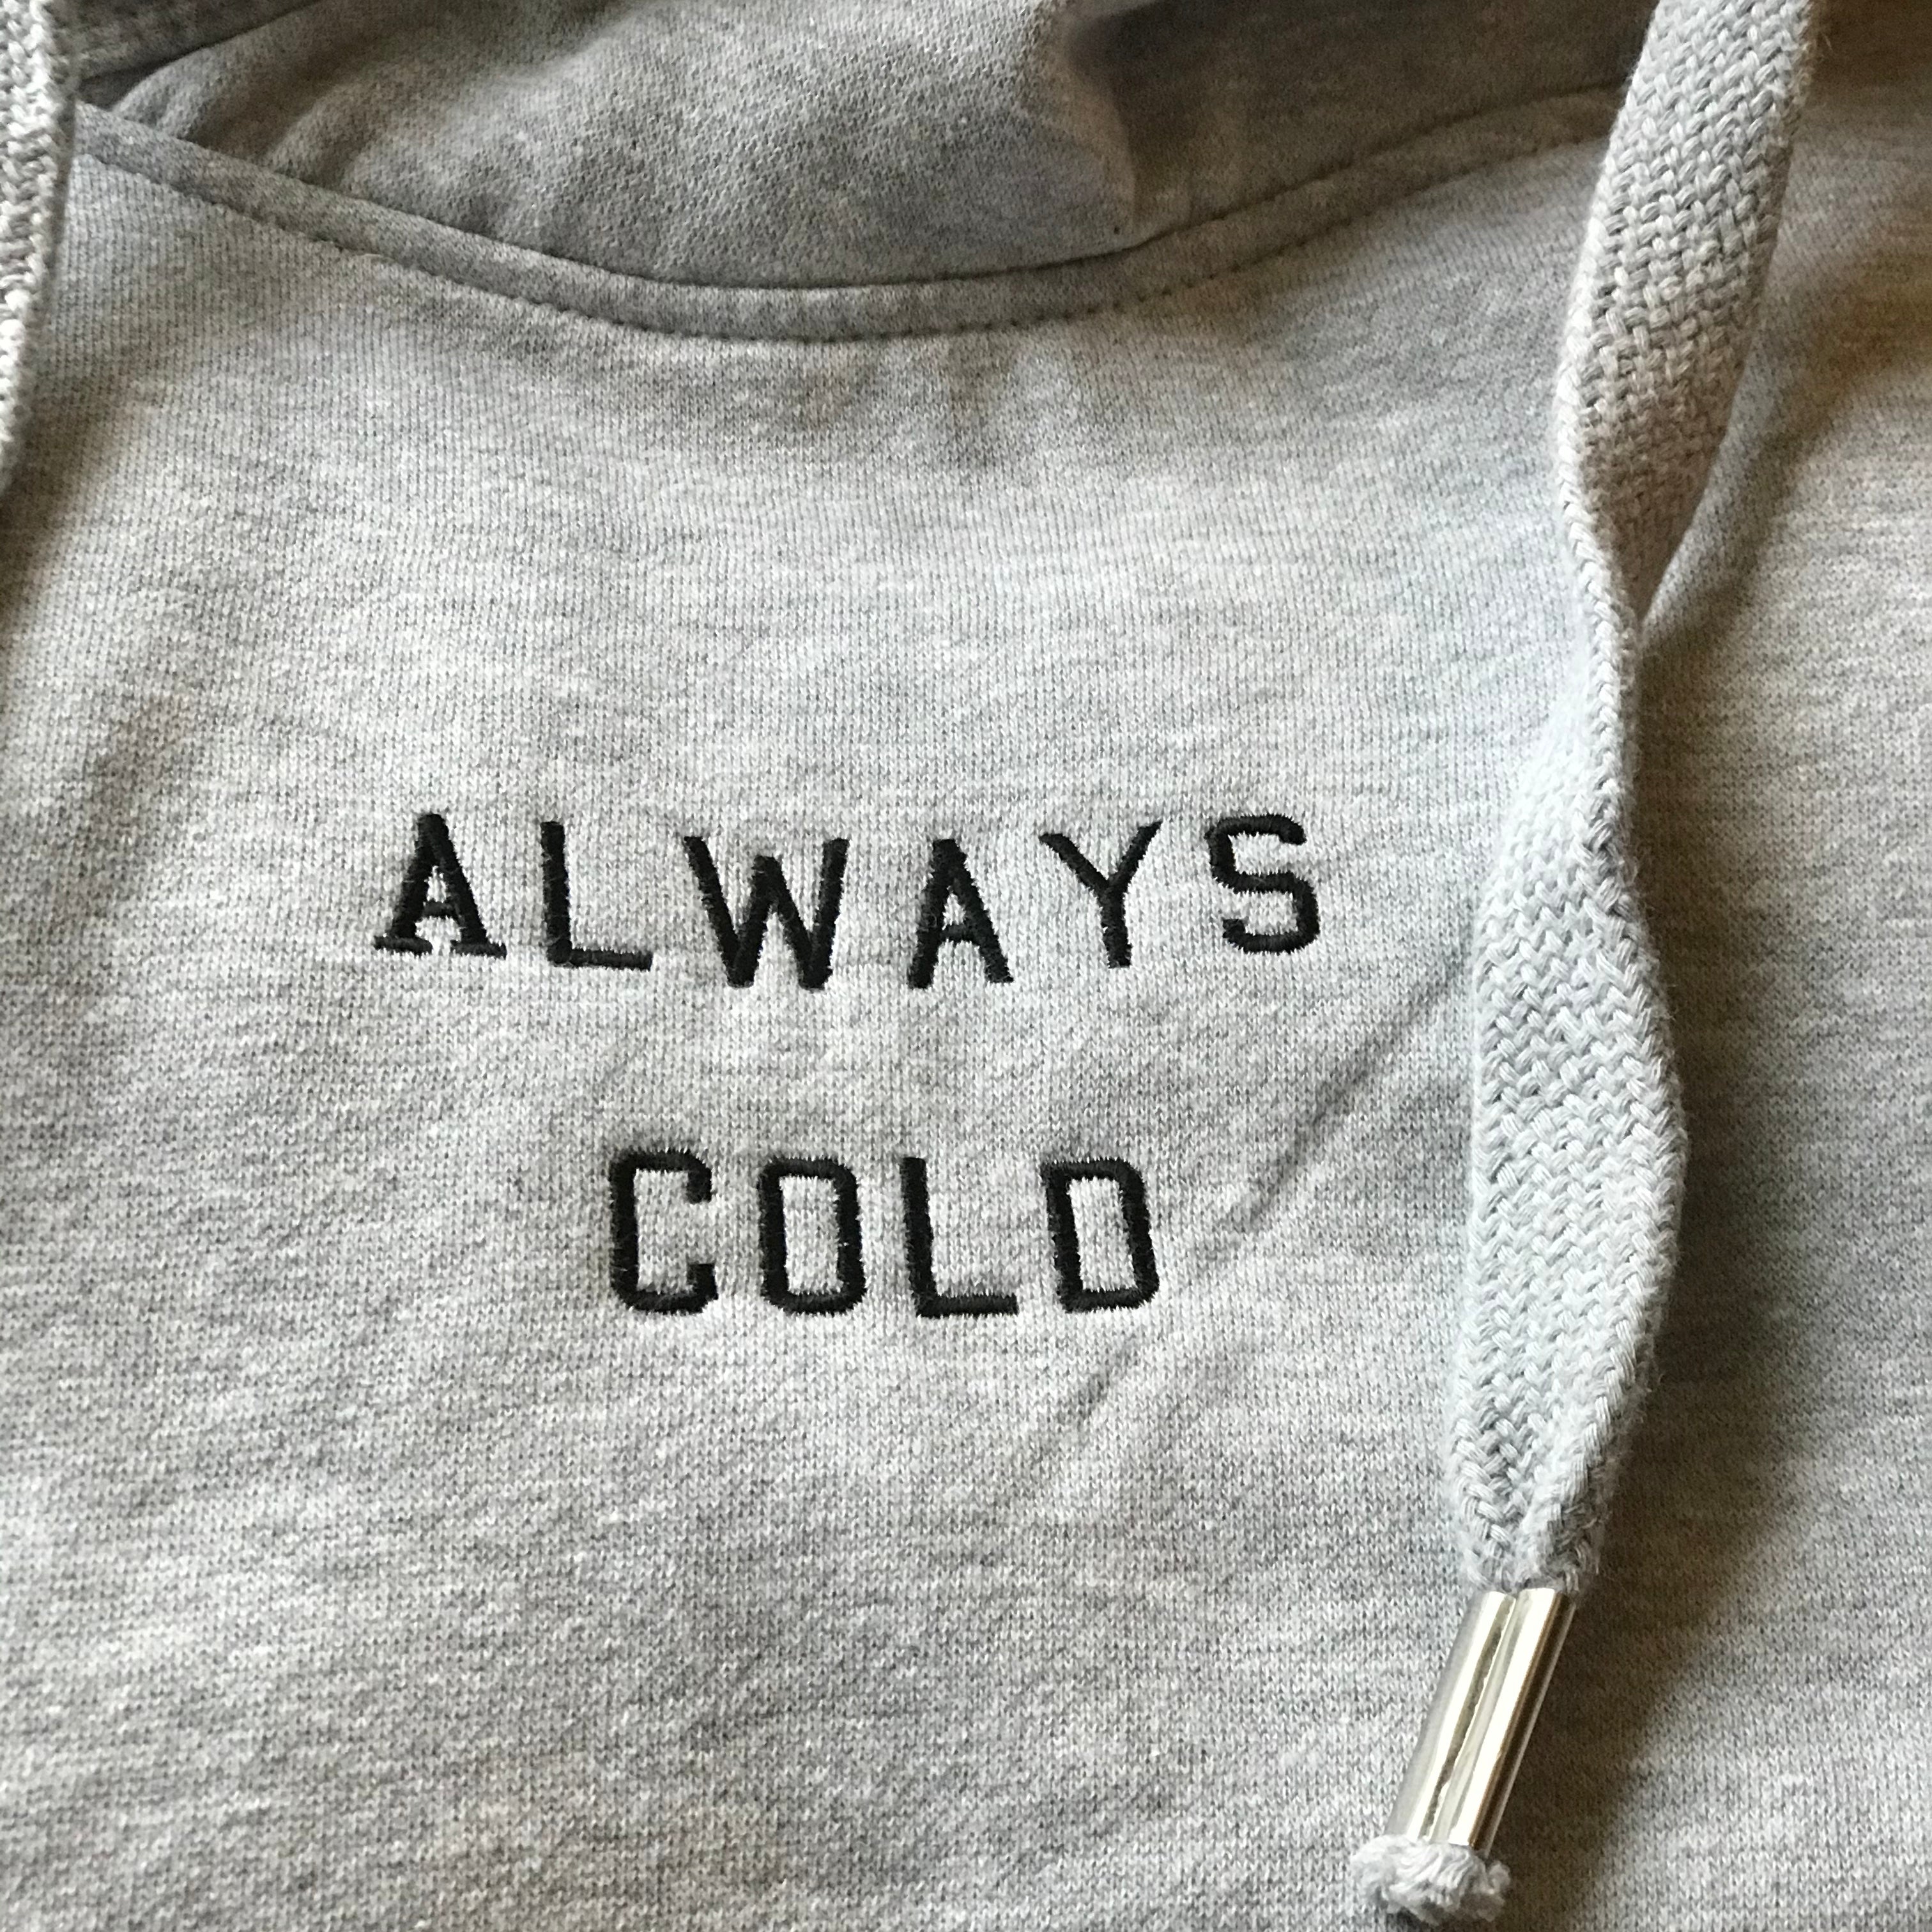 Womens Always Cold Hoodie - Spoke & Solace